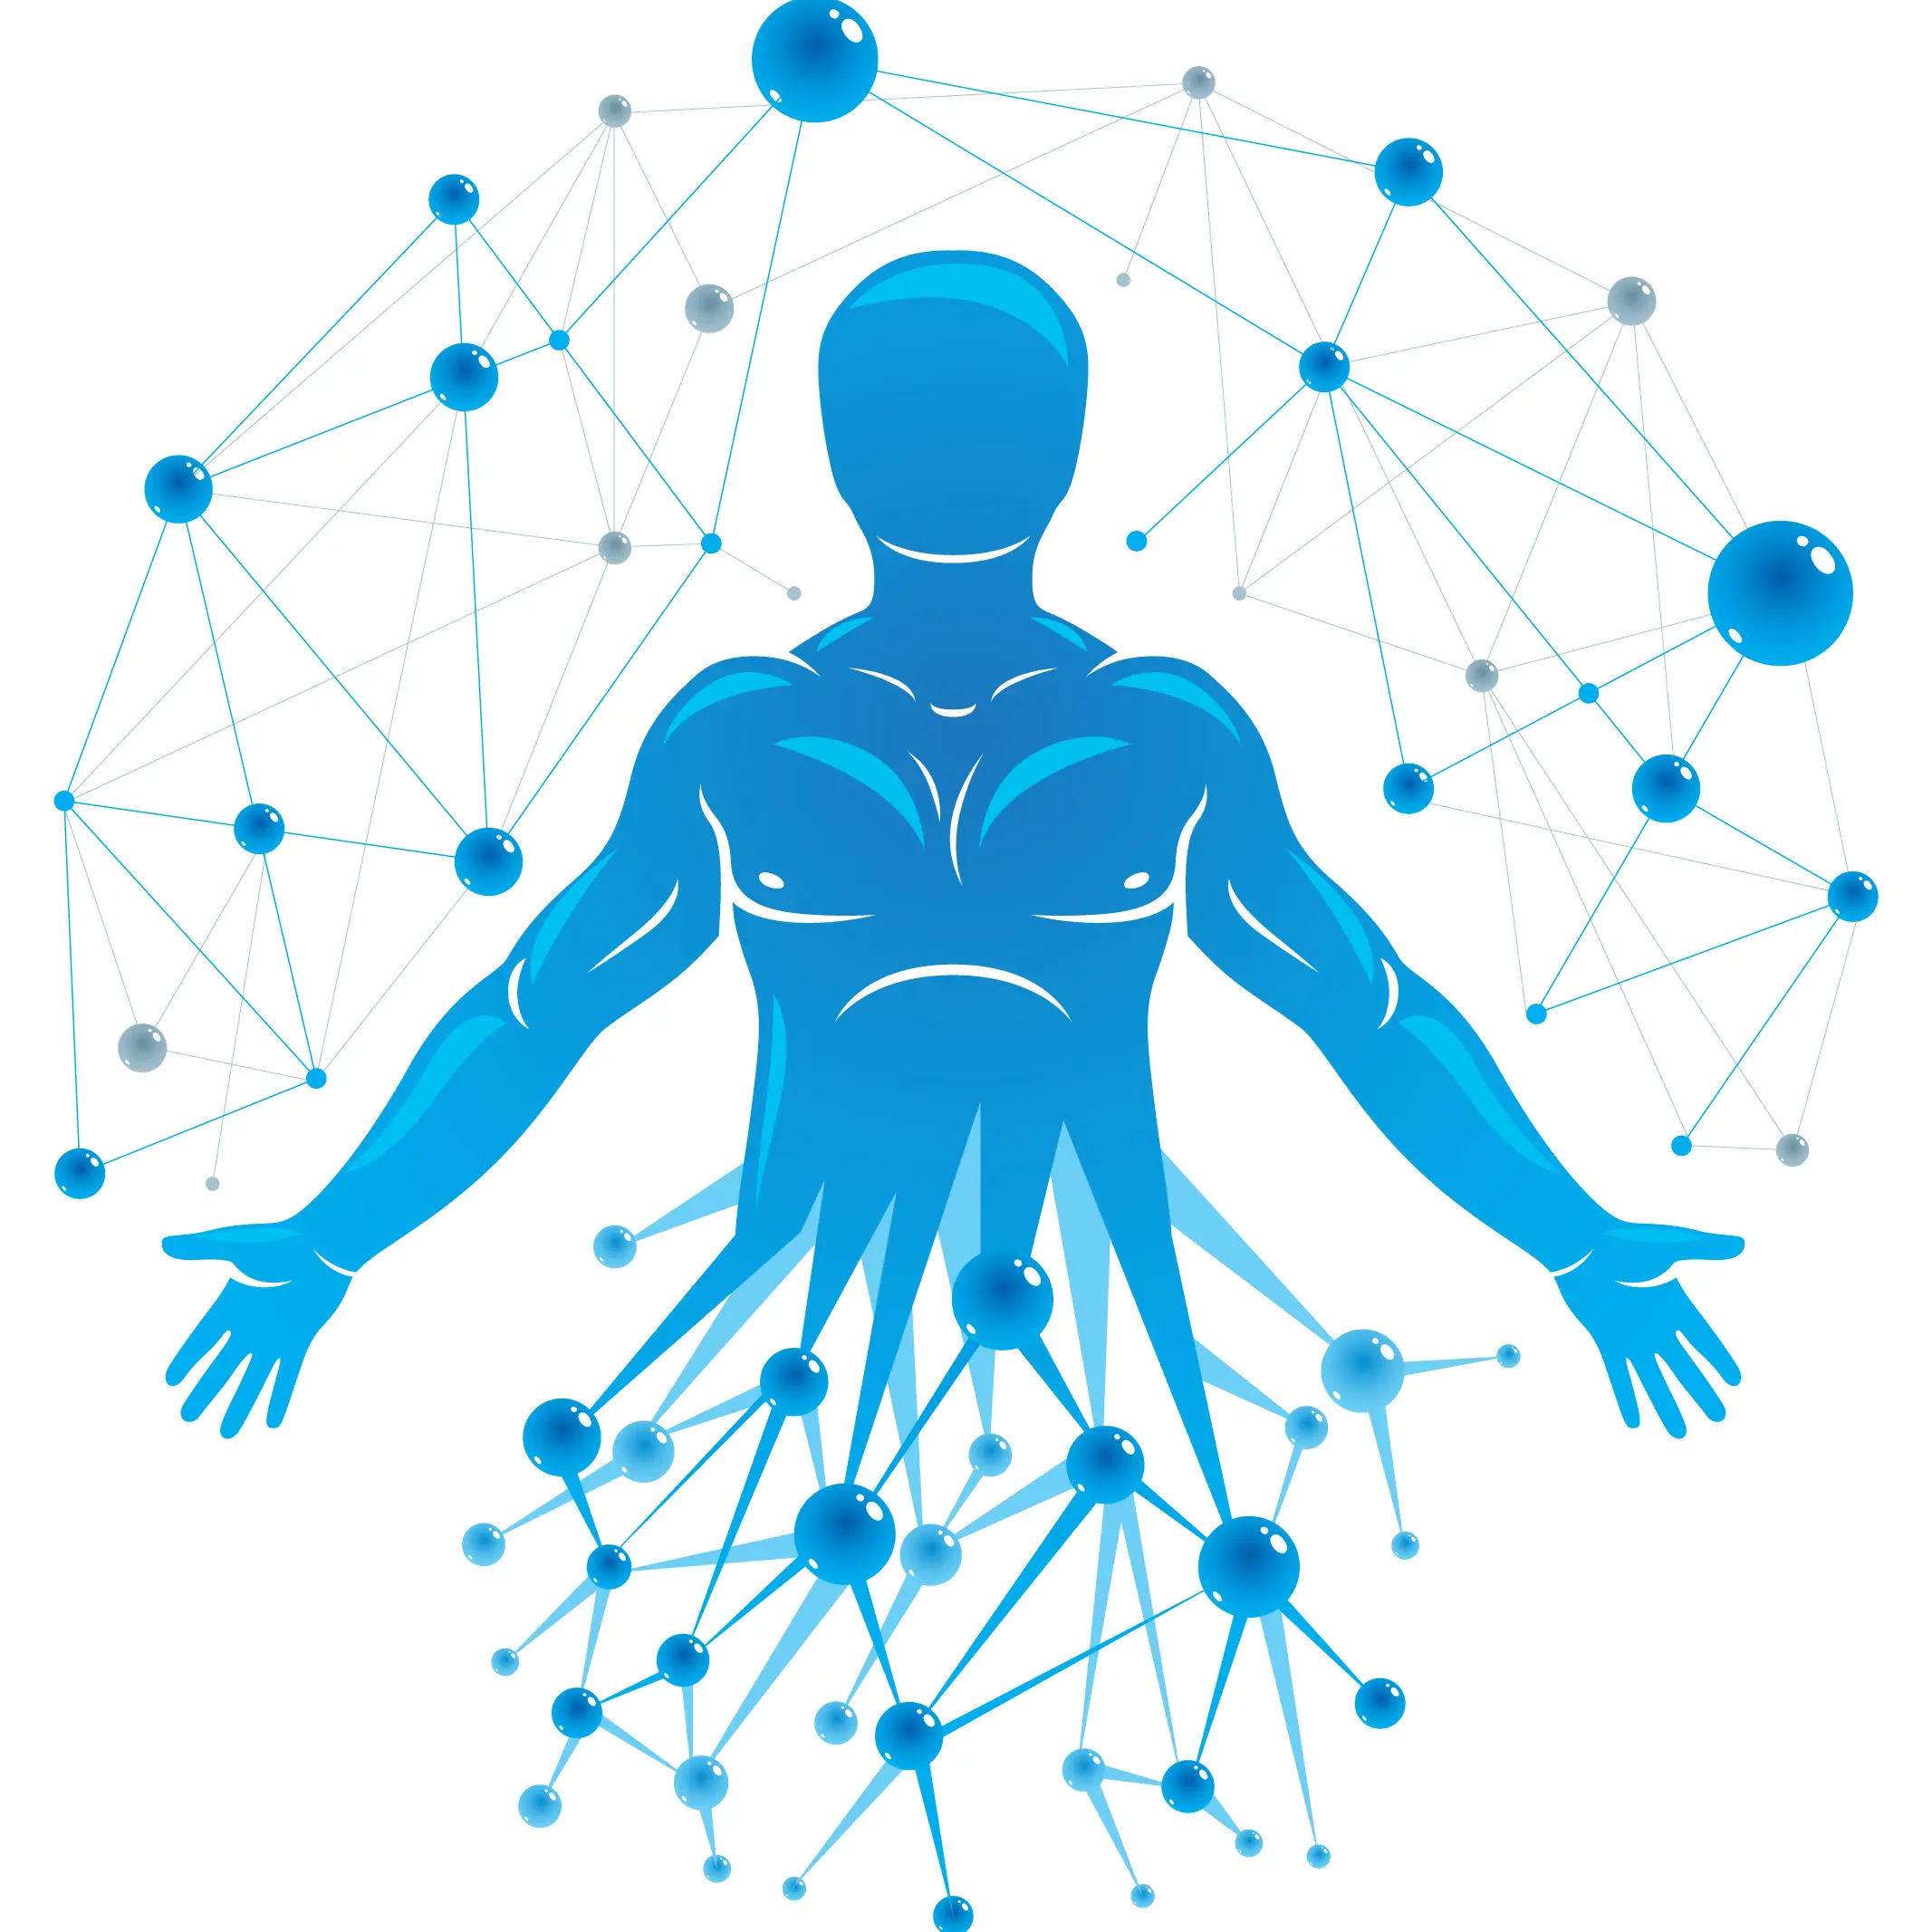 Illustration of the human body with blue dots symbolizing energy and Medical